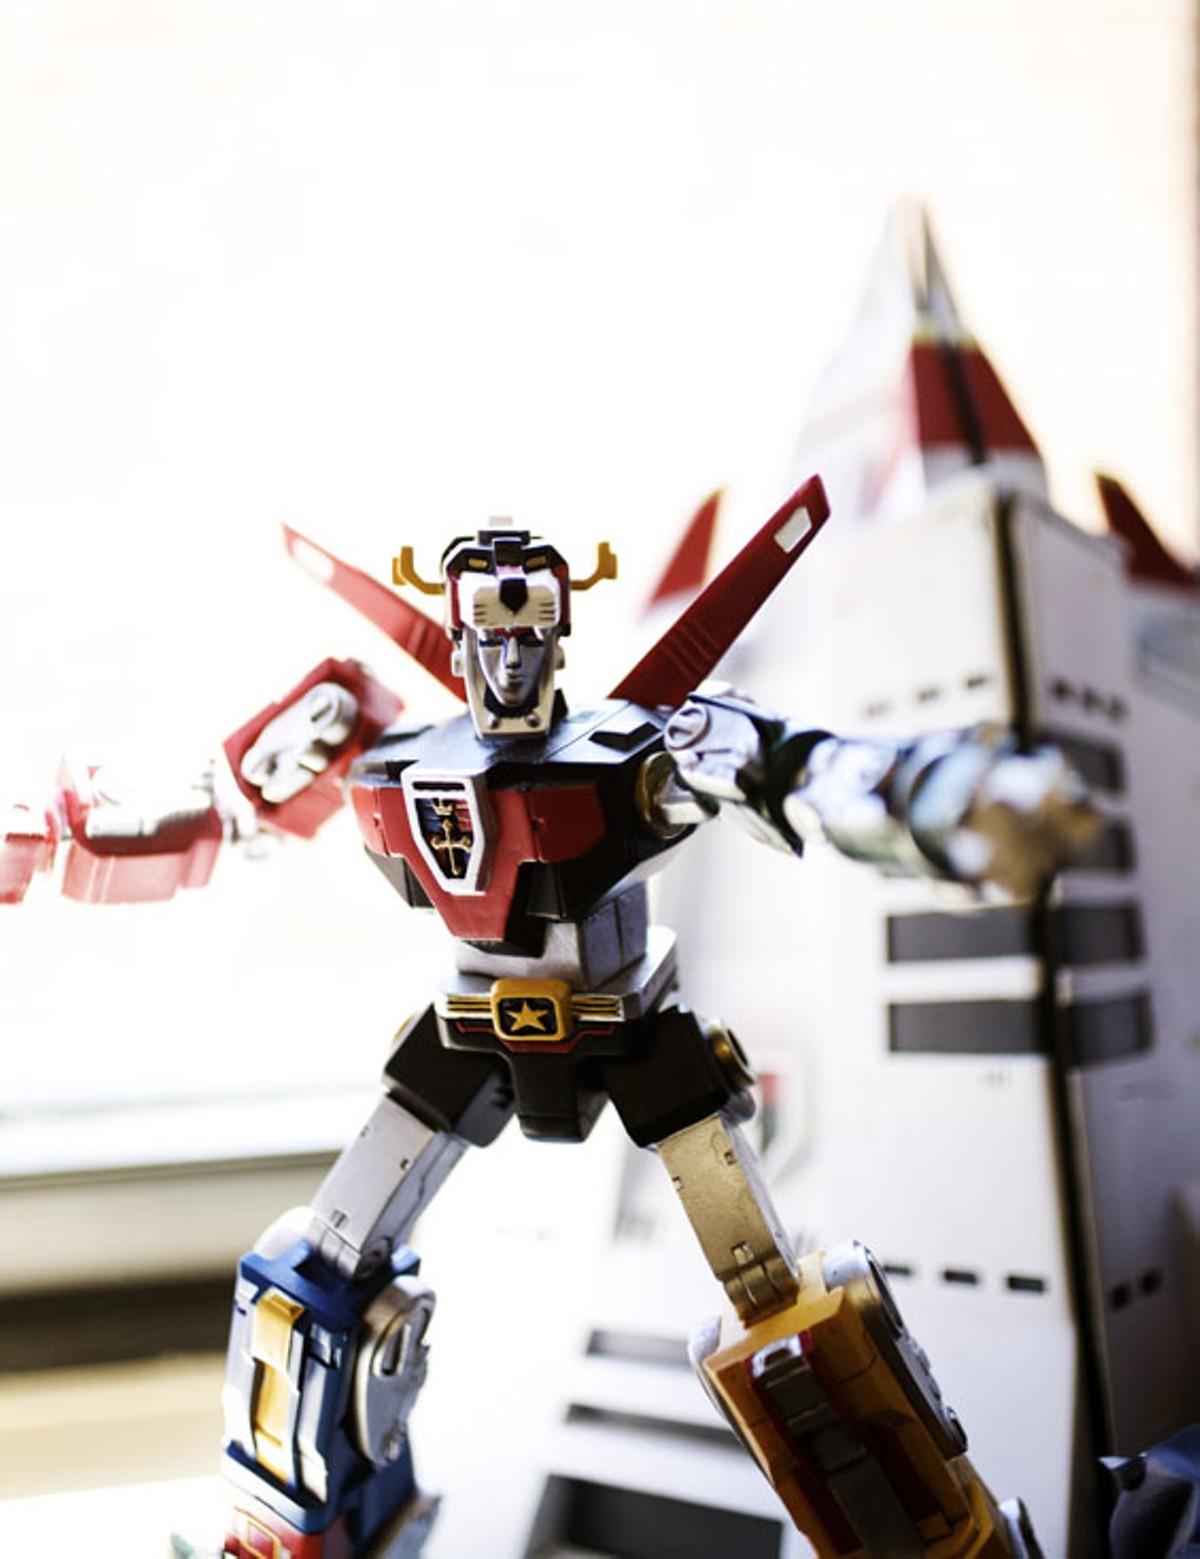 Voltron prepares to recapture the universe from a small office in St. Louis